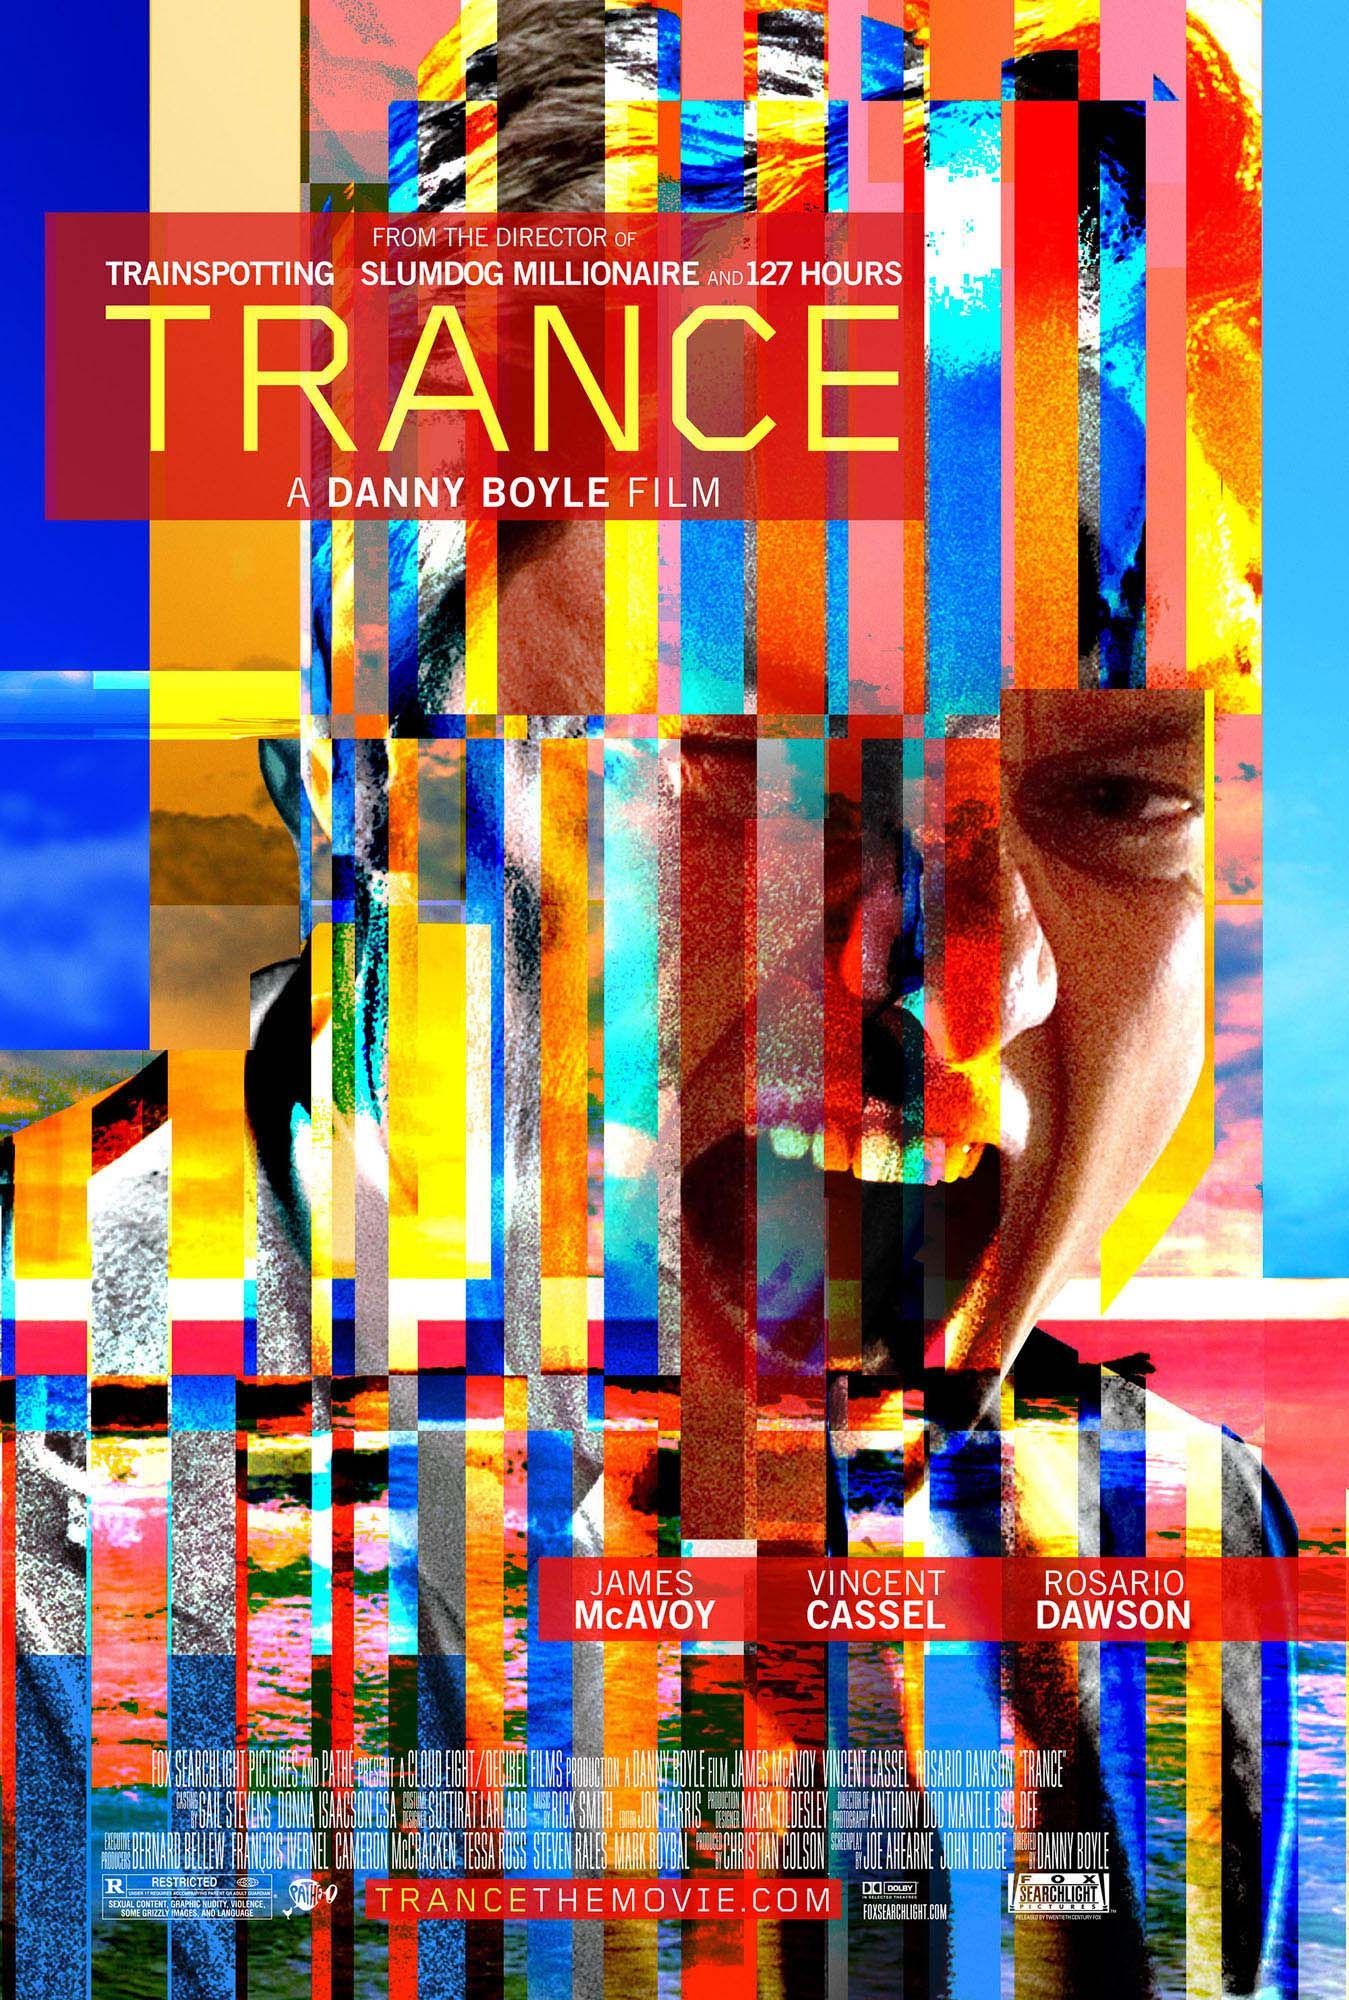 Danny Boyle's TRANCE Set for April 5th U.S. Release; New Poster